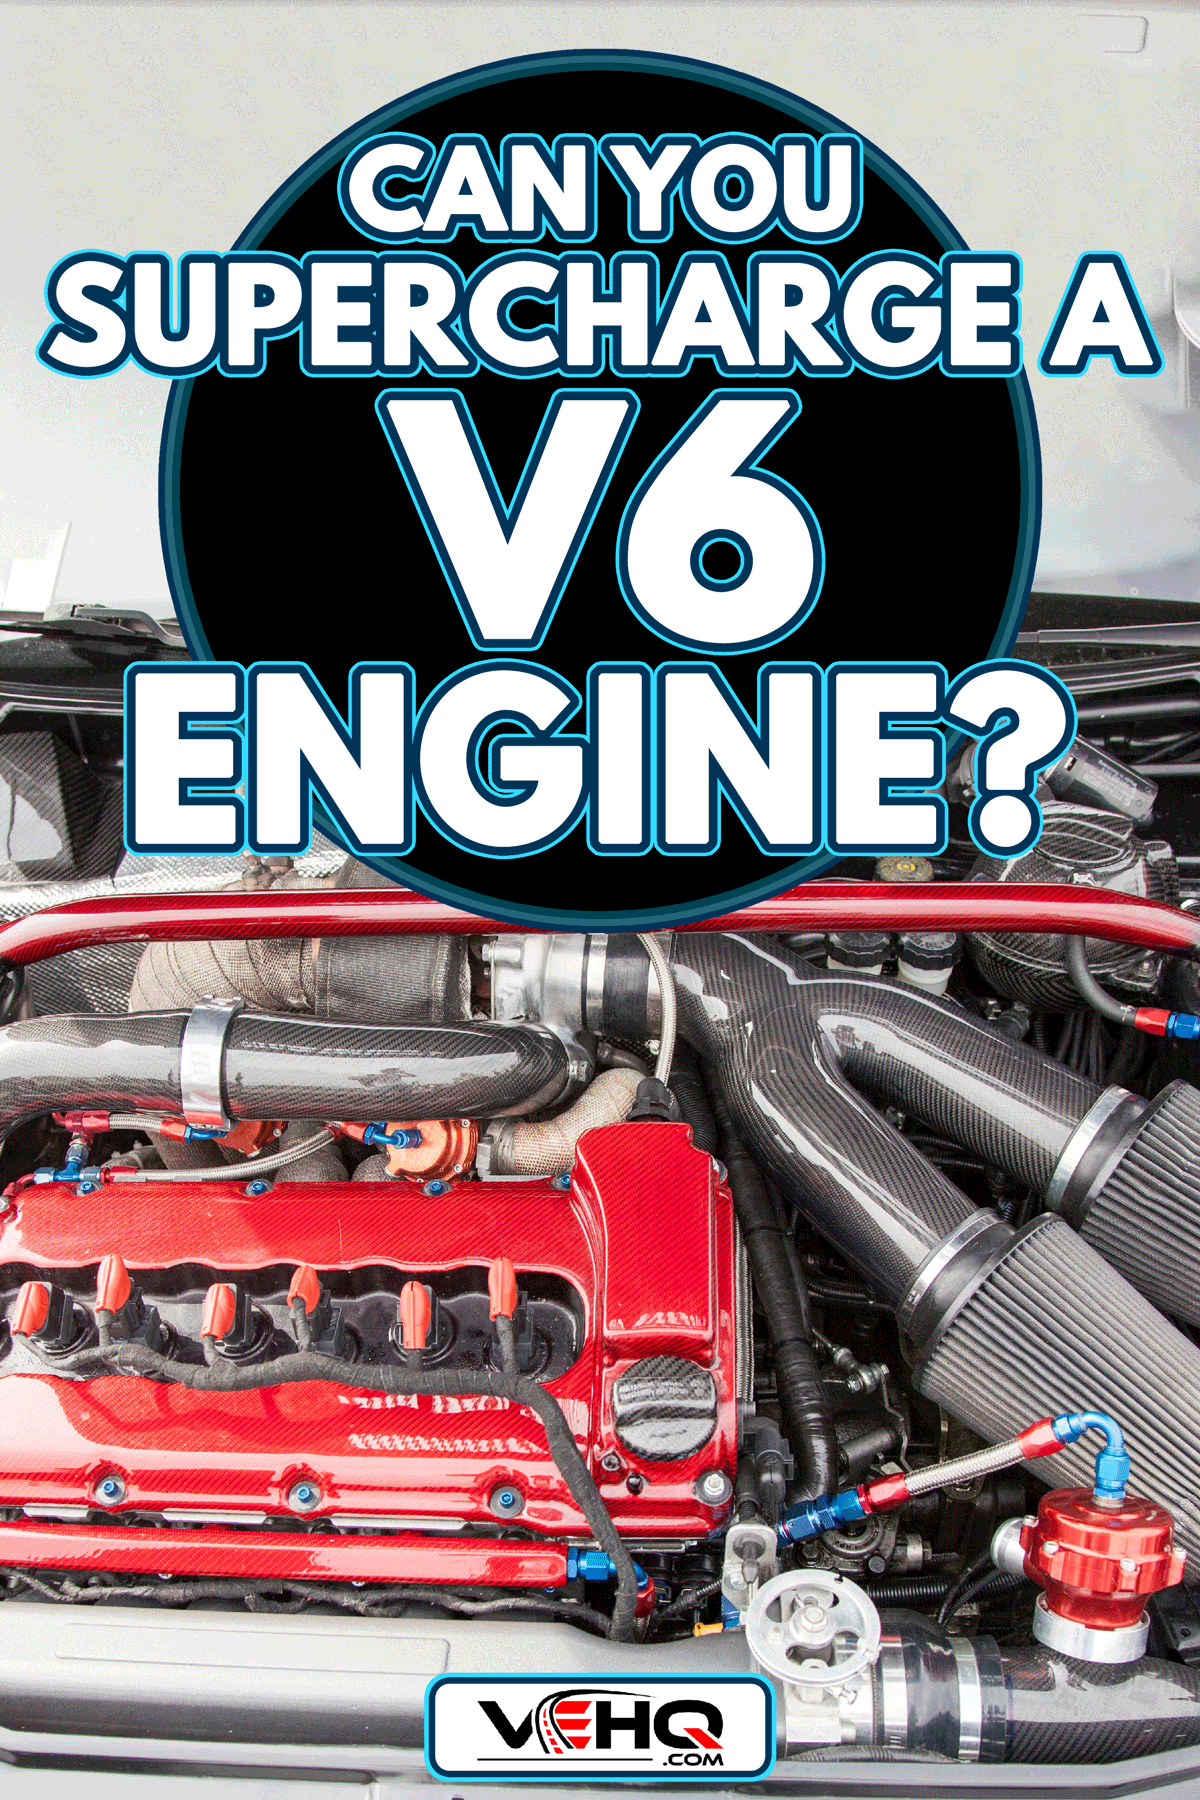 Supercharged sports car engine, Can You Supercharge A V6 Engine?